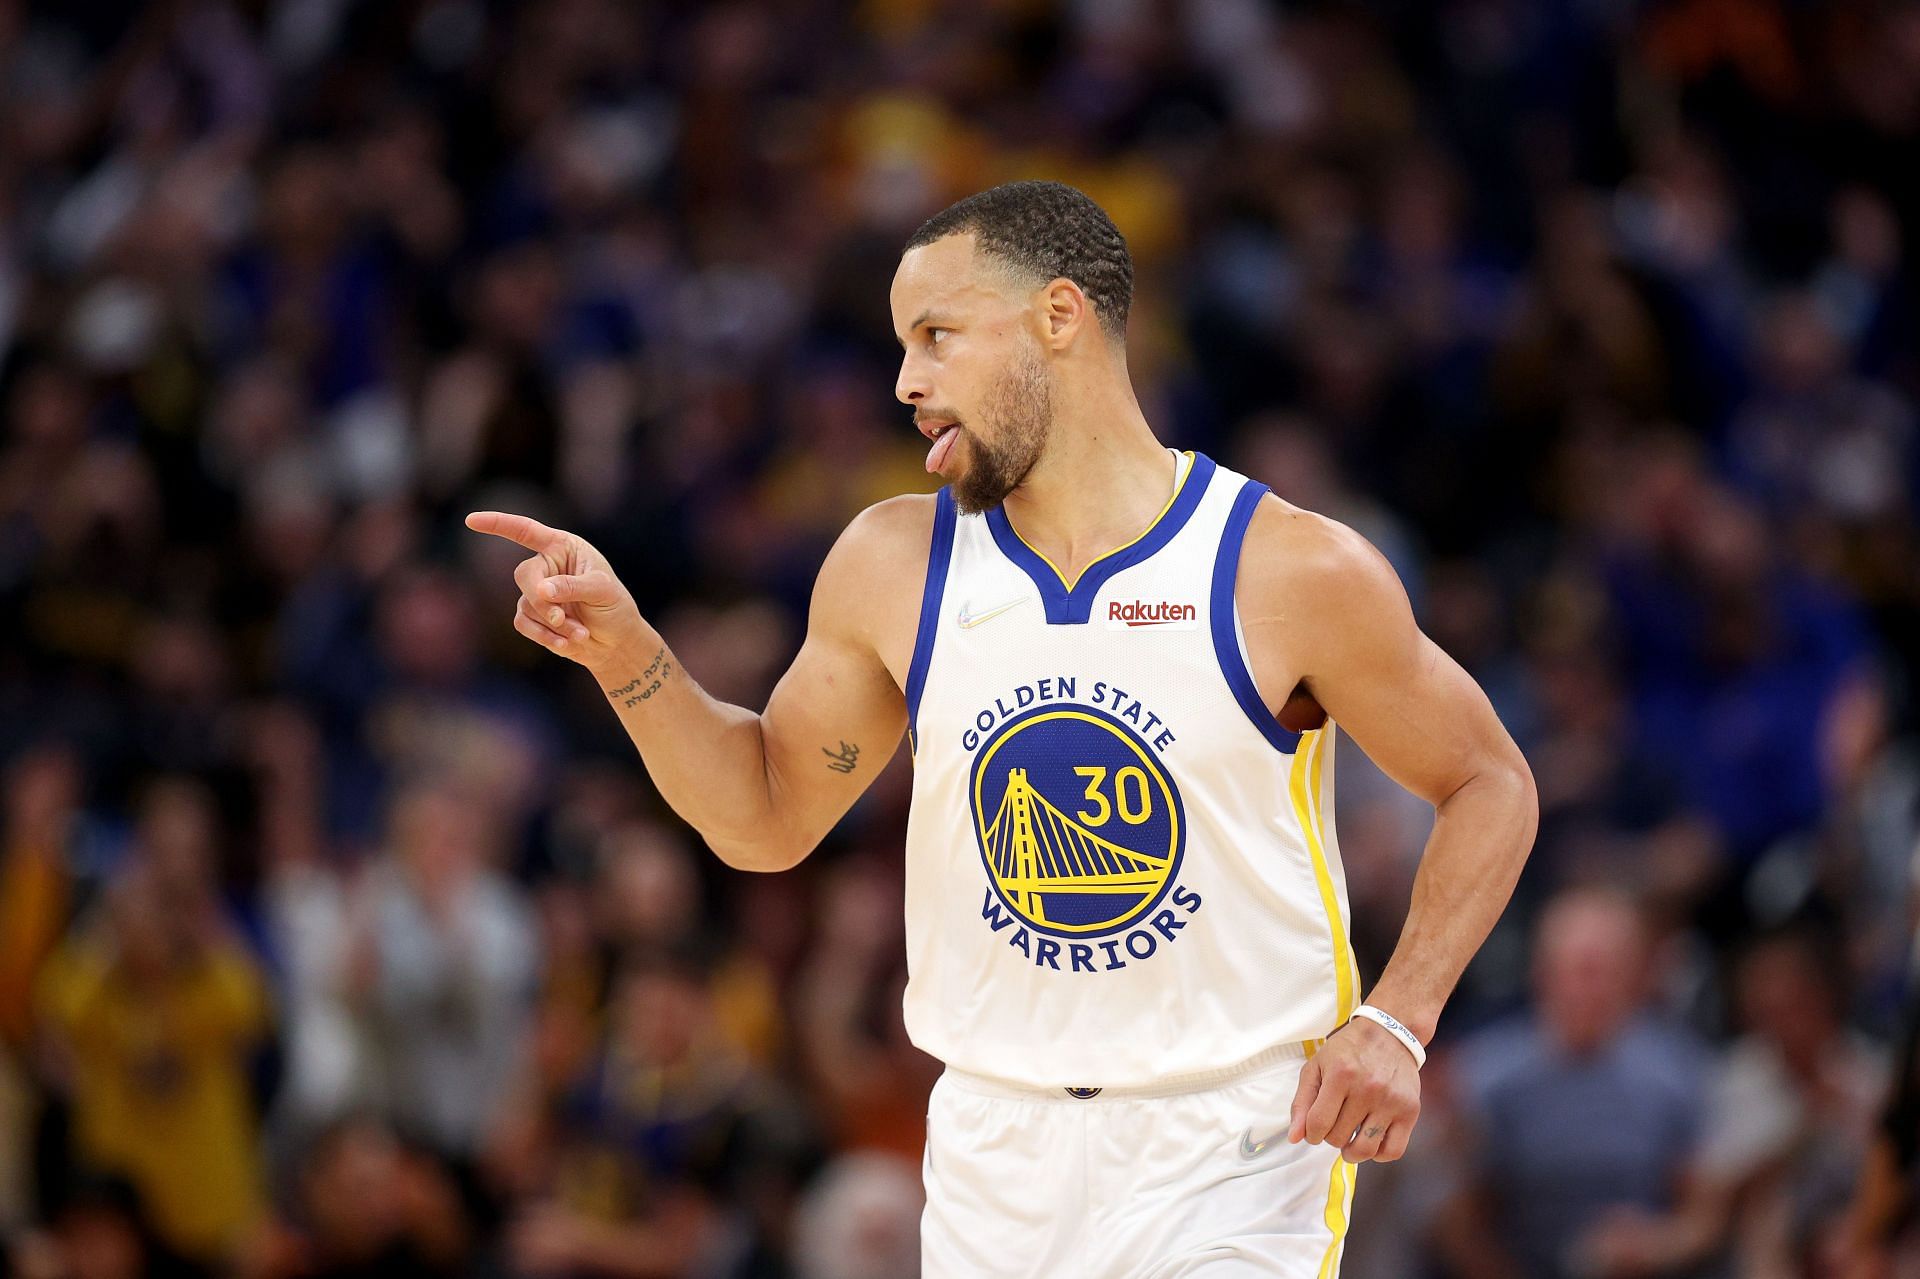 Steph Curry scored 34 points in 23 minutes while coming off the bench for the Golden State Warriors on Monday.